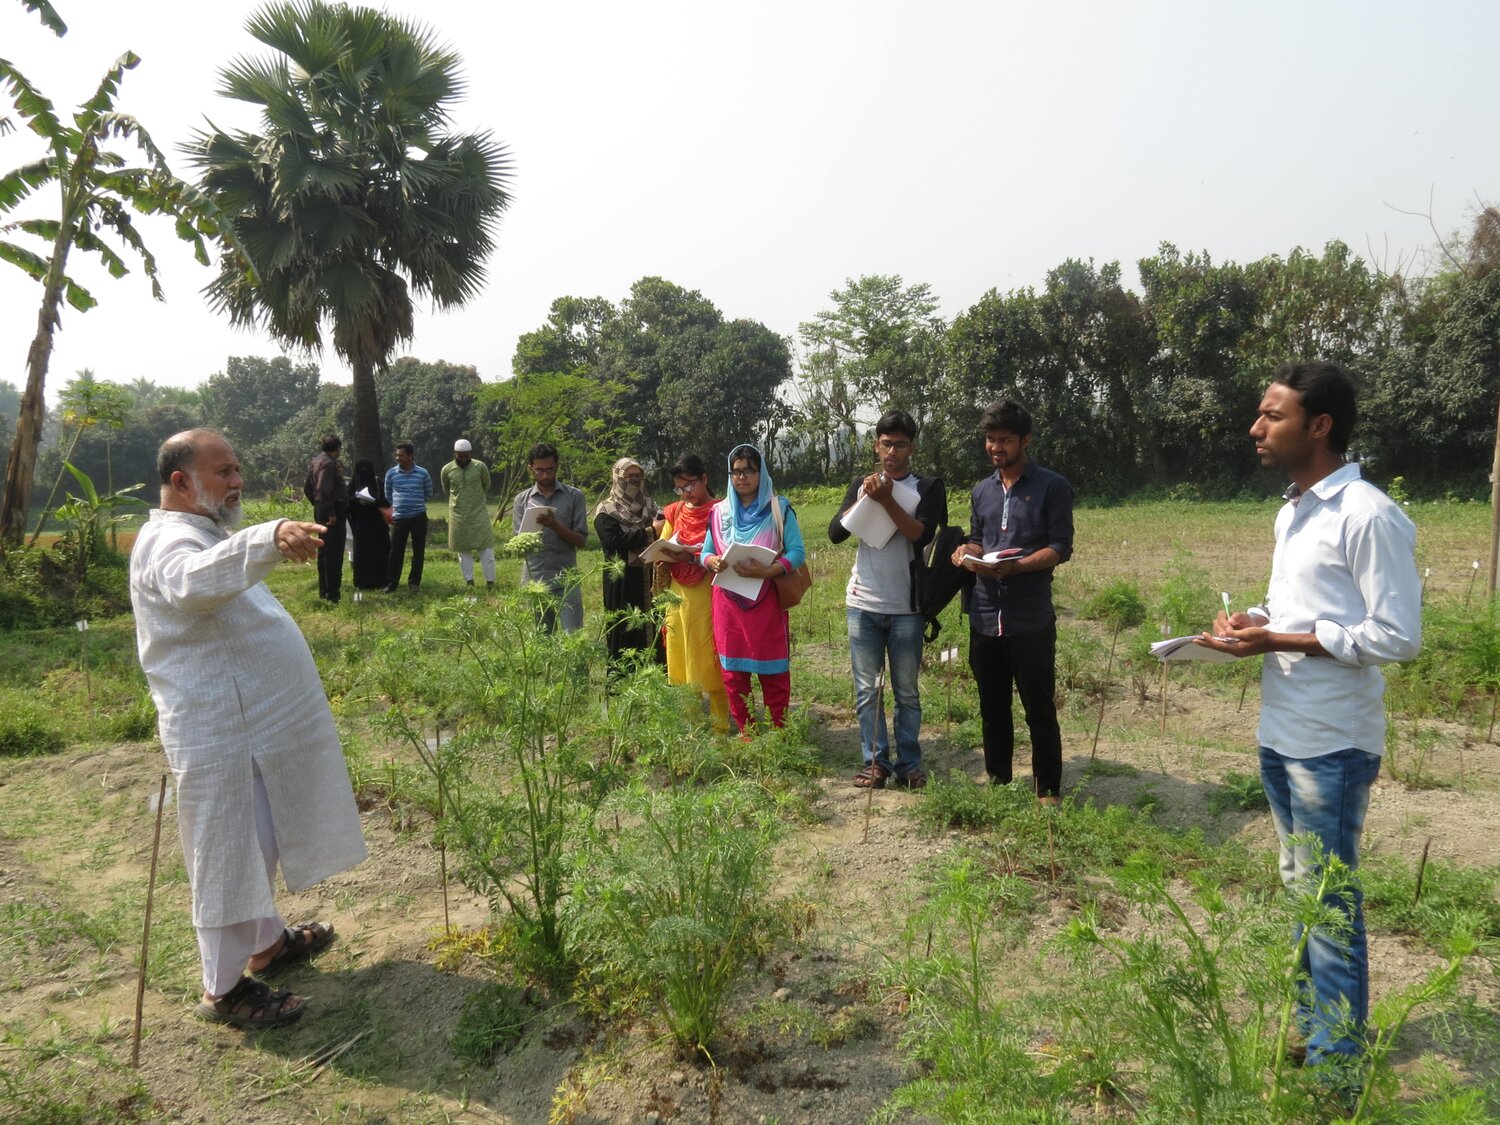 Professor Rahim standing in a carrot field giving a lesson to graduate students who are taking notes. 